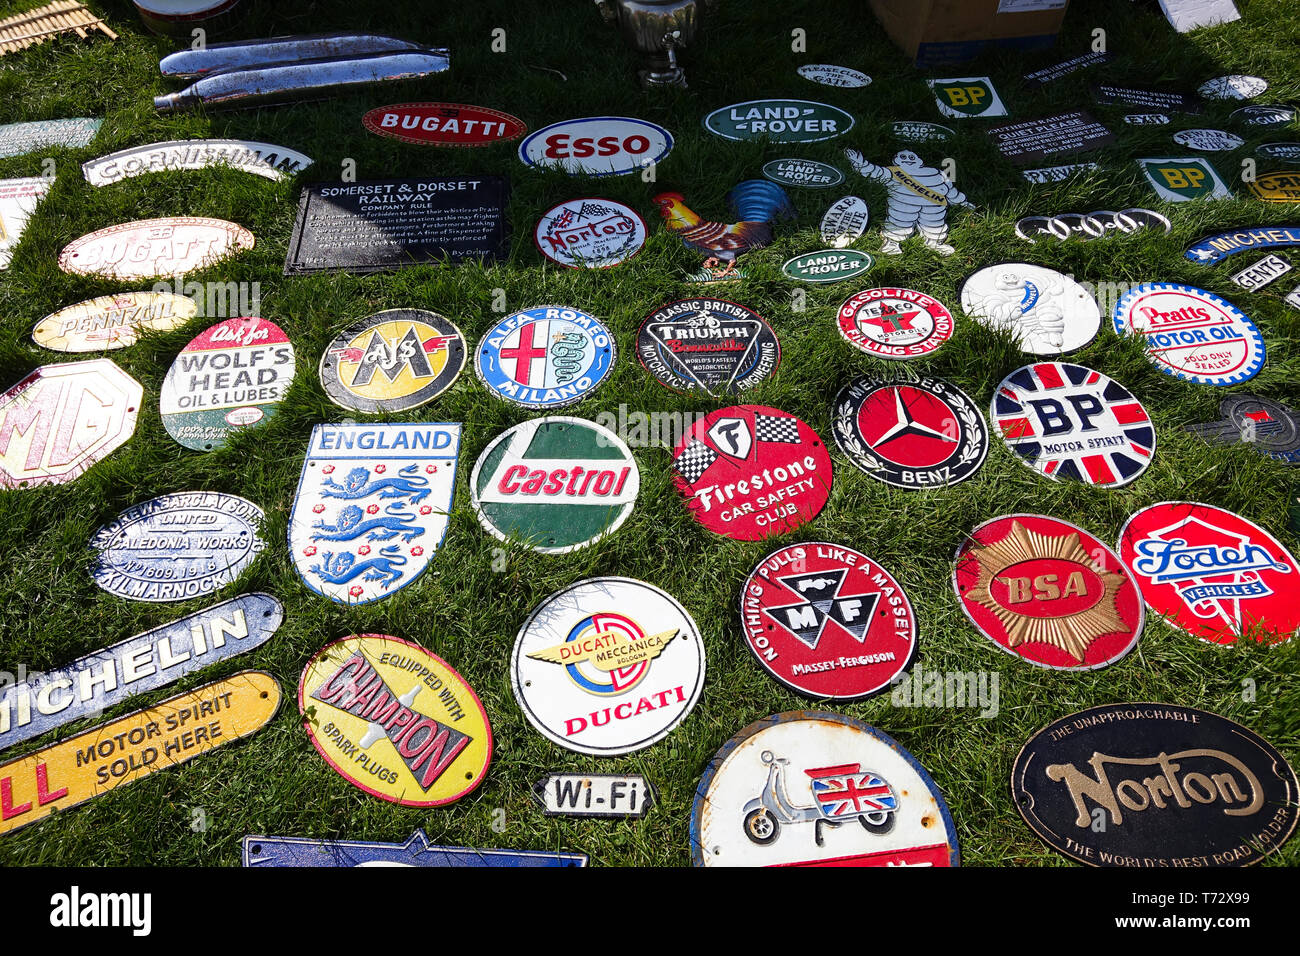 Display of old signs and badges at car boot sale Stock Photo